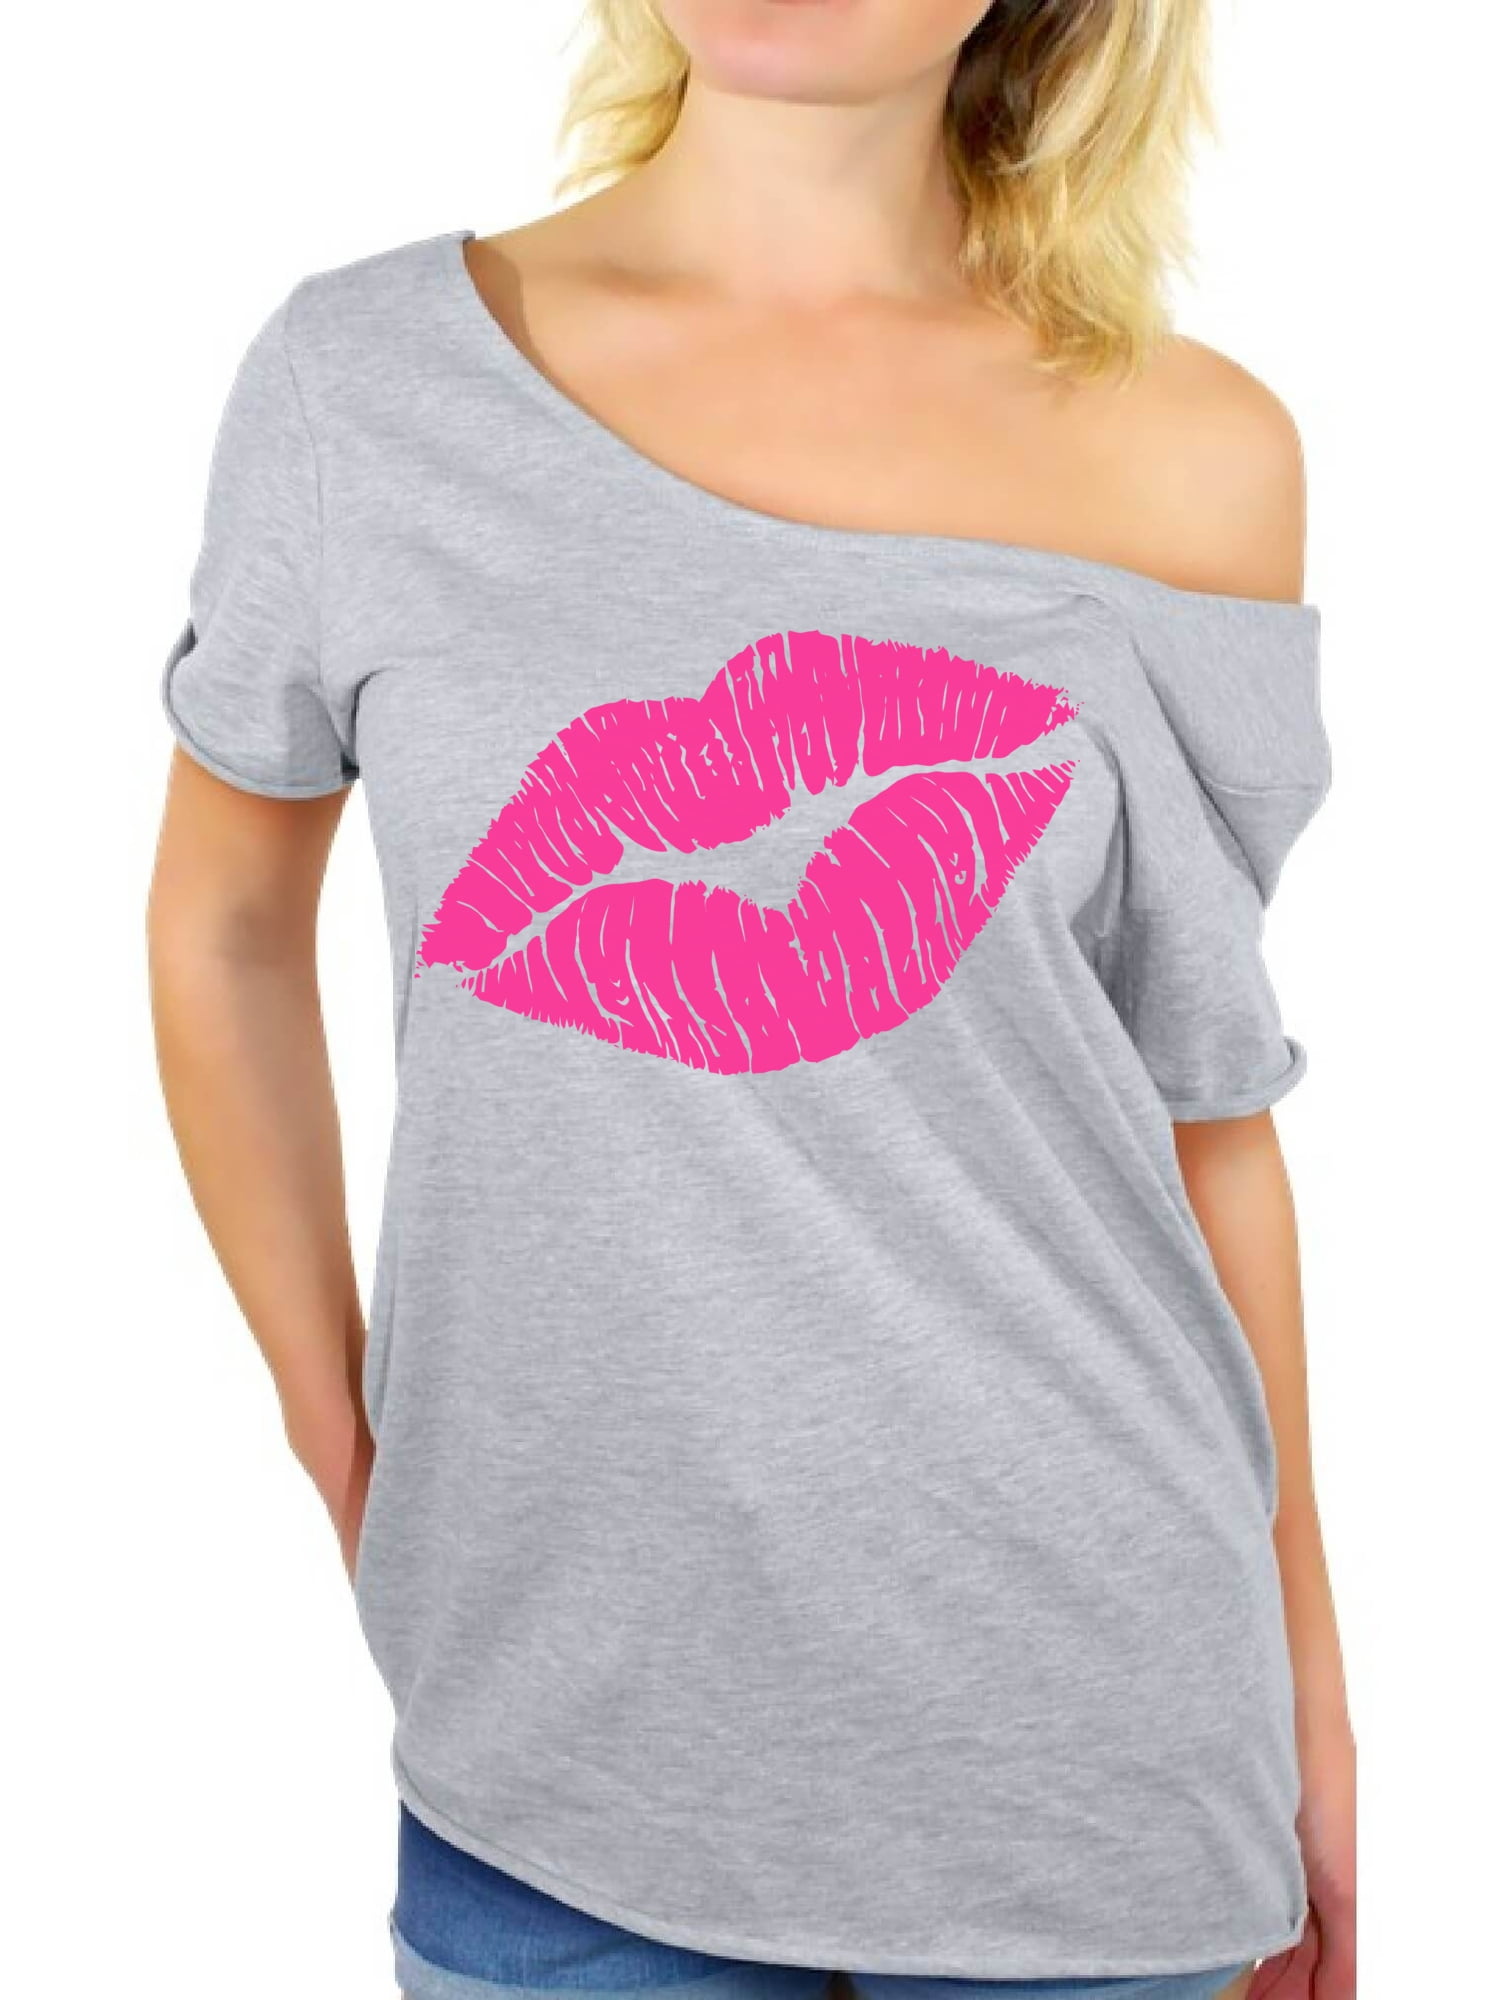 Lips Awkward T Shirt 80s T Costume Styles Women 80s Lips Shoulder the Shirt Shirt T Clothes Rock Accessories Shirt Neon 80s 80s 80s Shirt 80s Off Retro Pink 80s 80s for